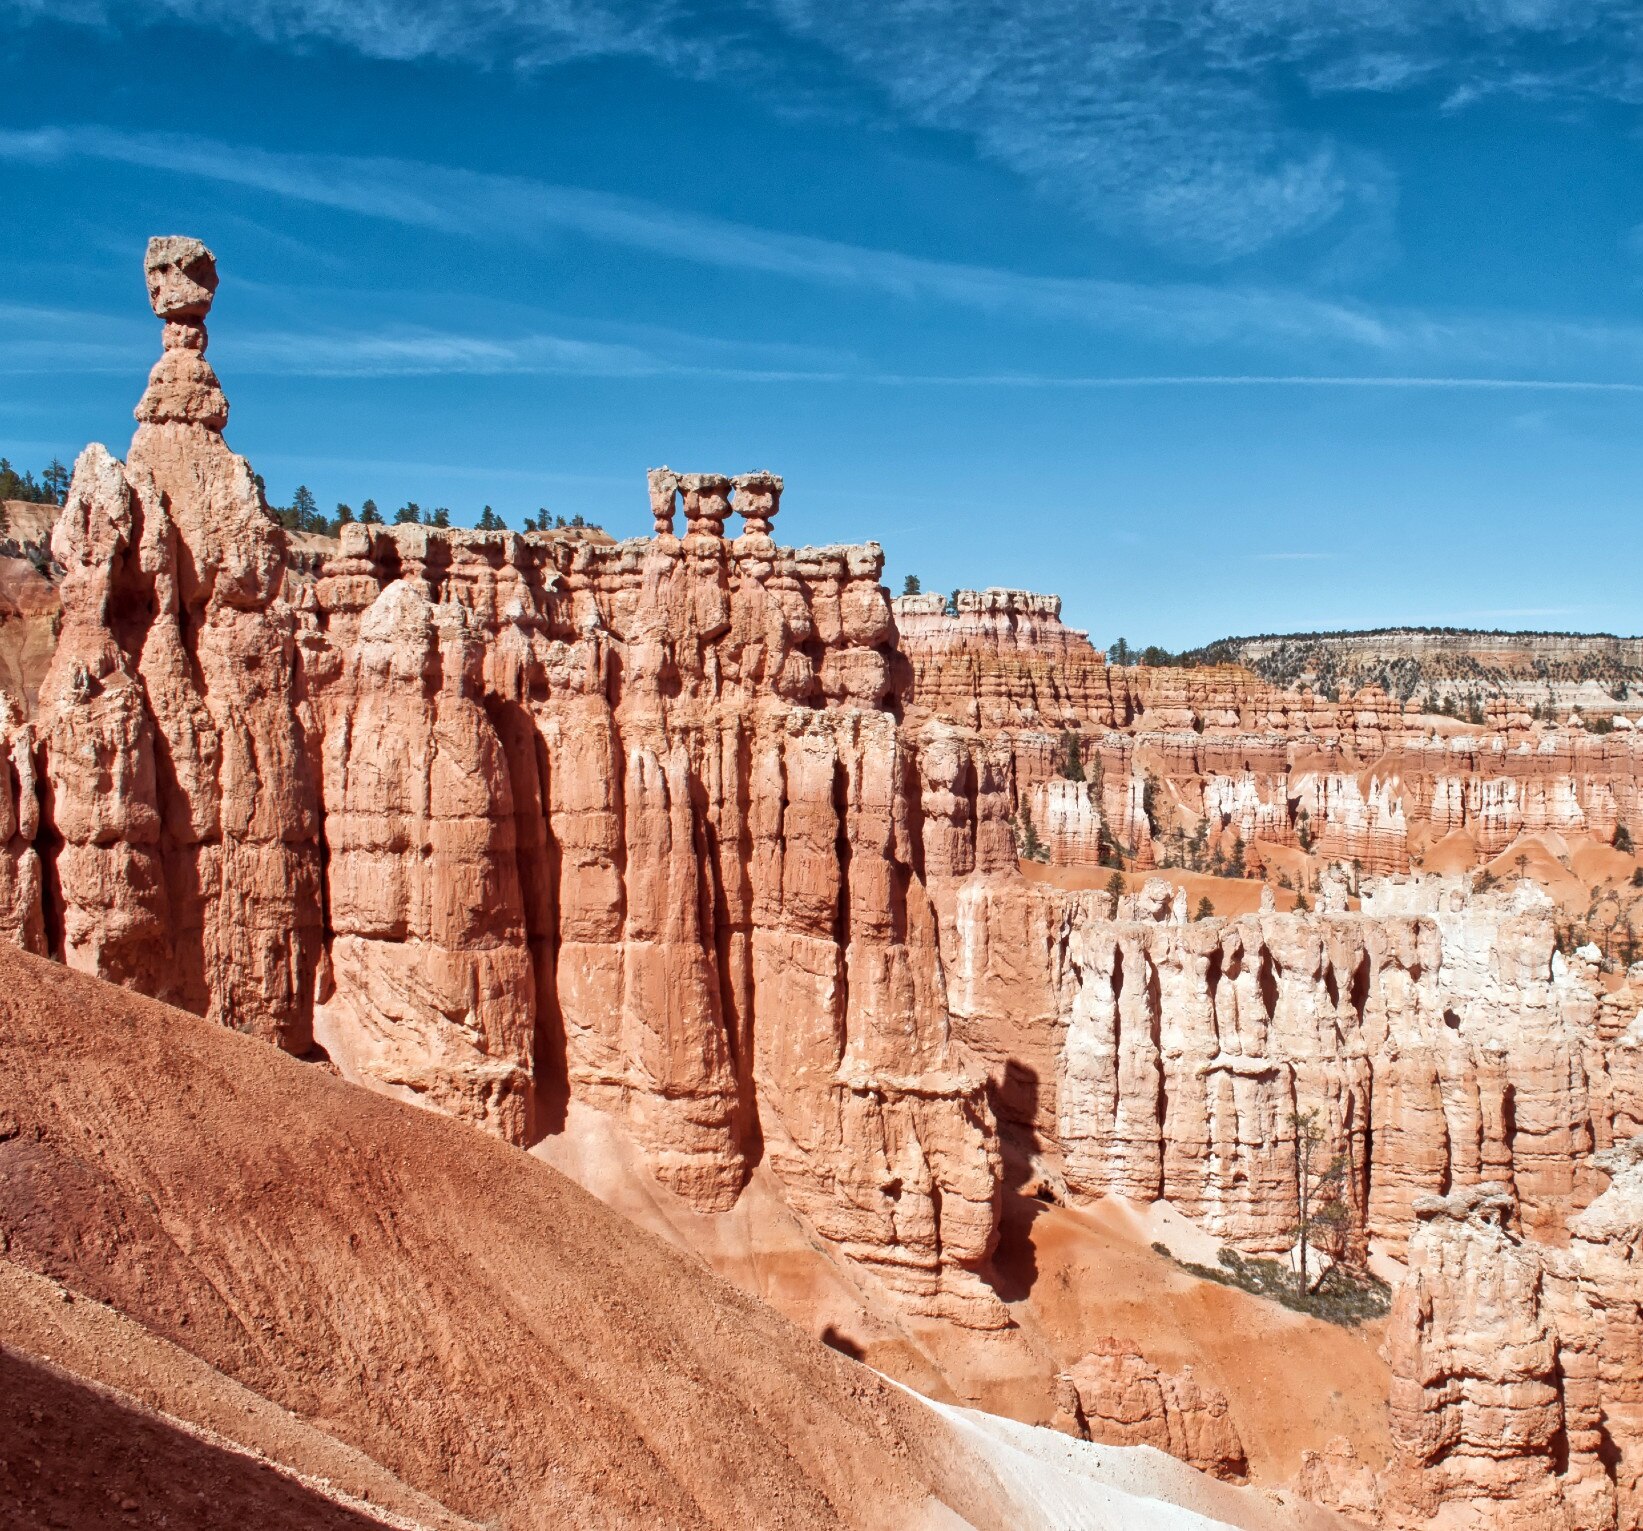 Bryce Canyon National Park, Bryce Canyon, Utah, United States of America